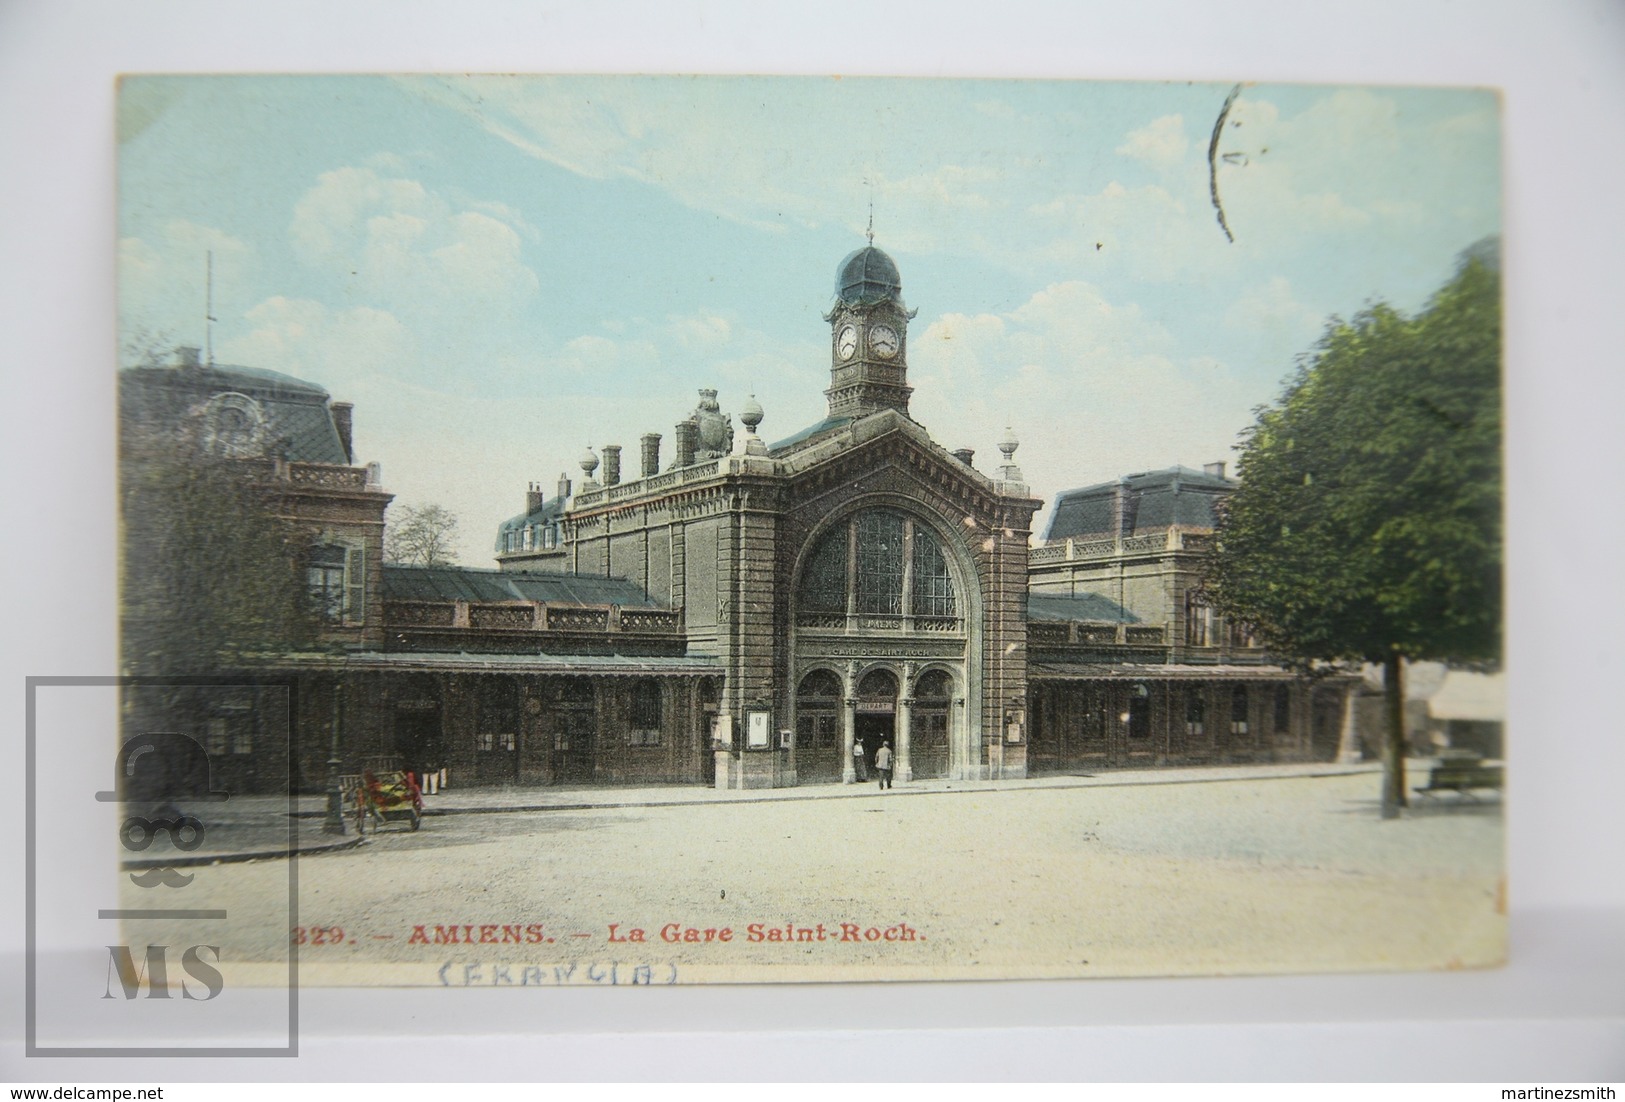 Old Real Photo Postcard France - Amiens - La Gare Saint Roch - Posted - Amiens